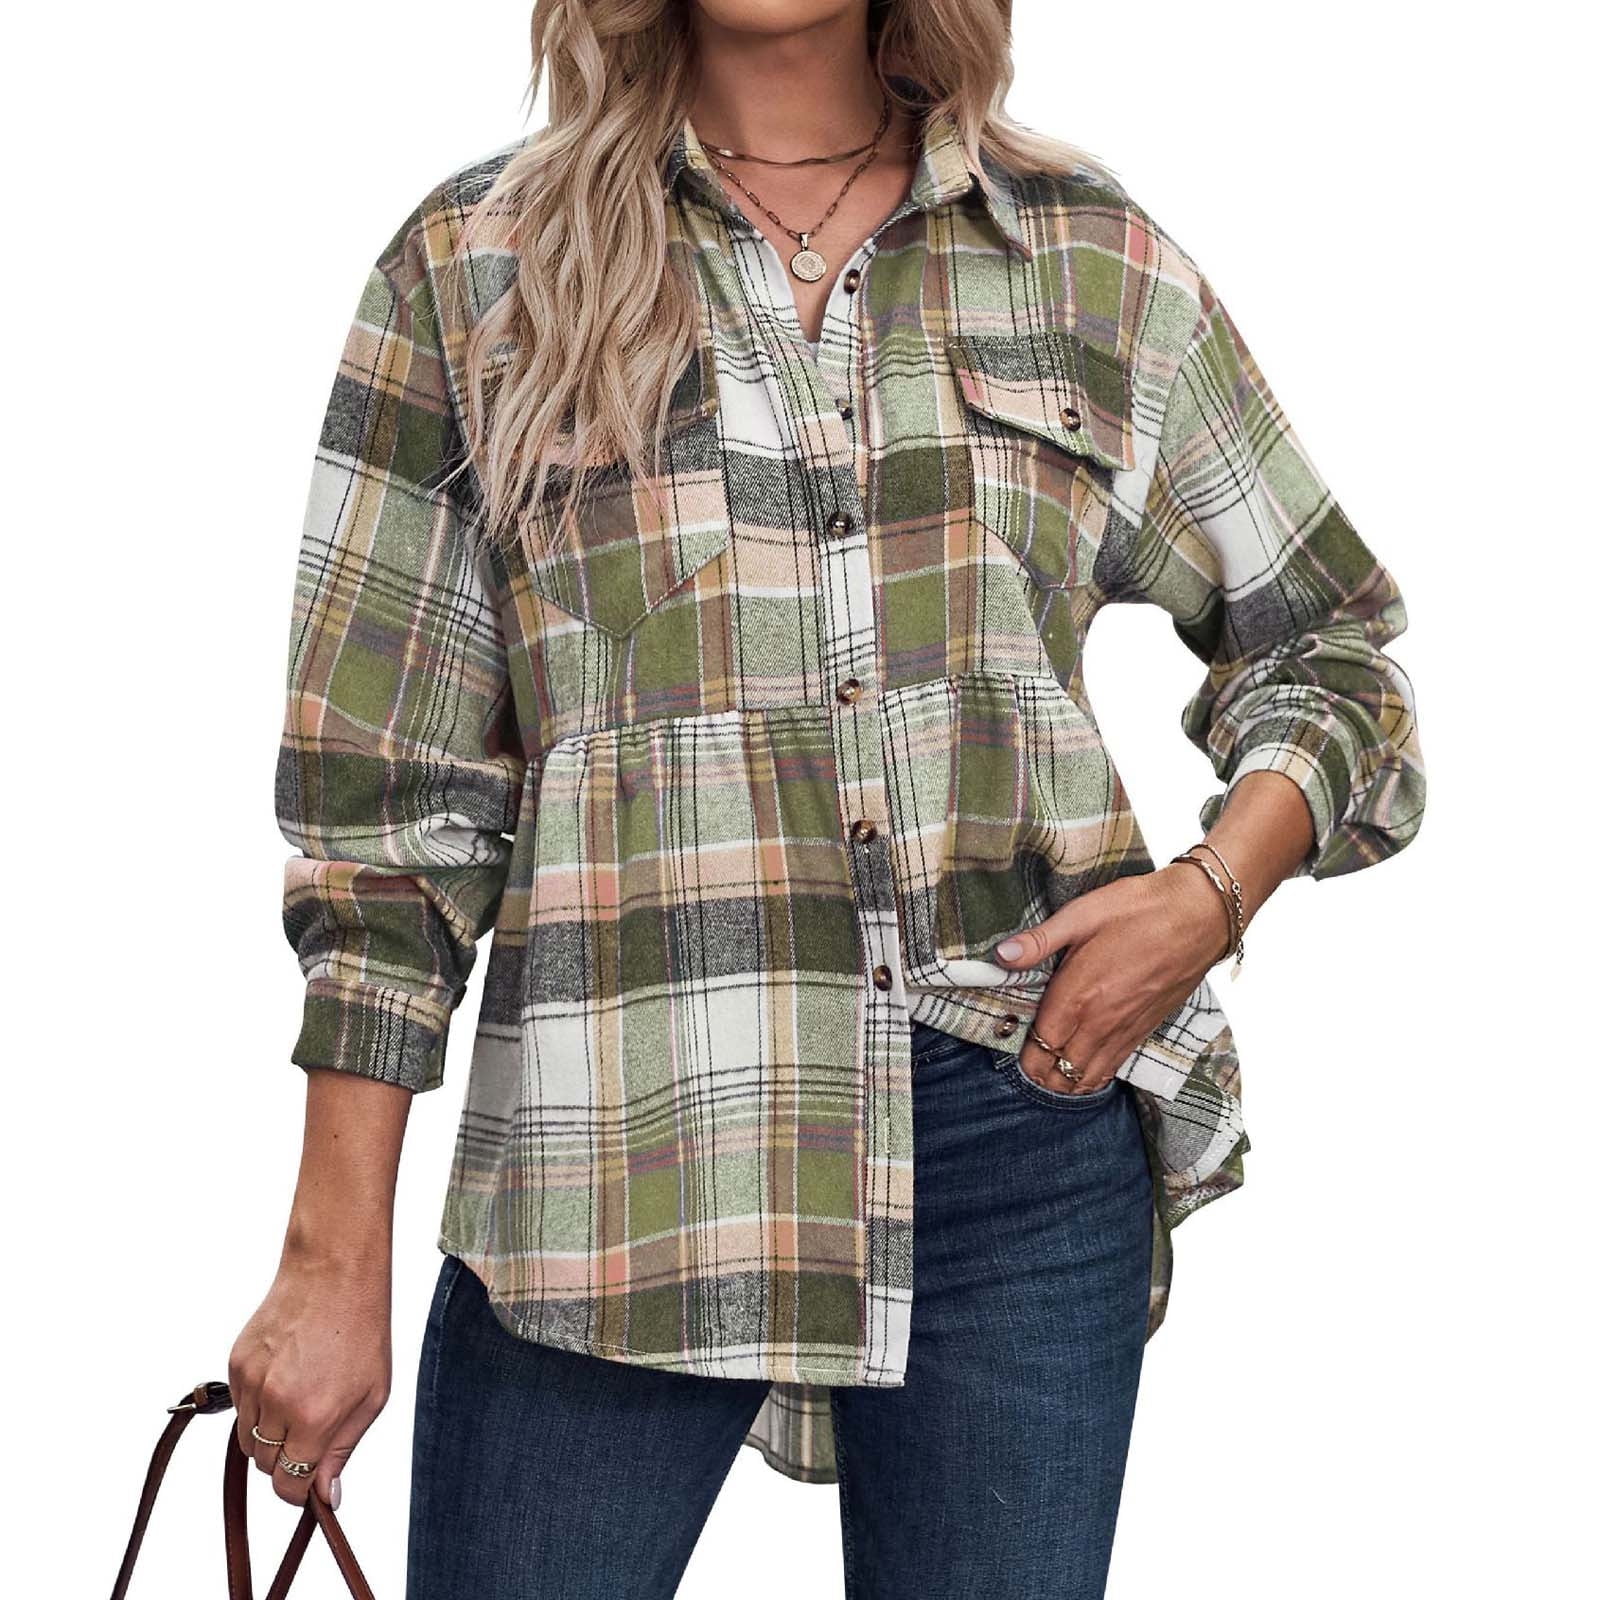 JGGSPWM Flannel Plaid Shirts for Women Oversized Button Down